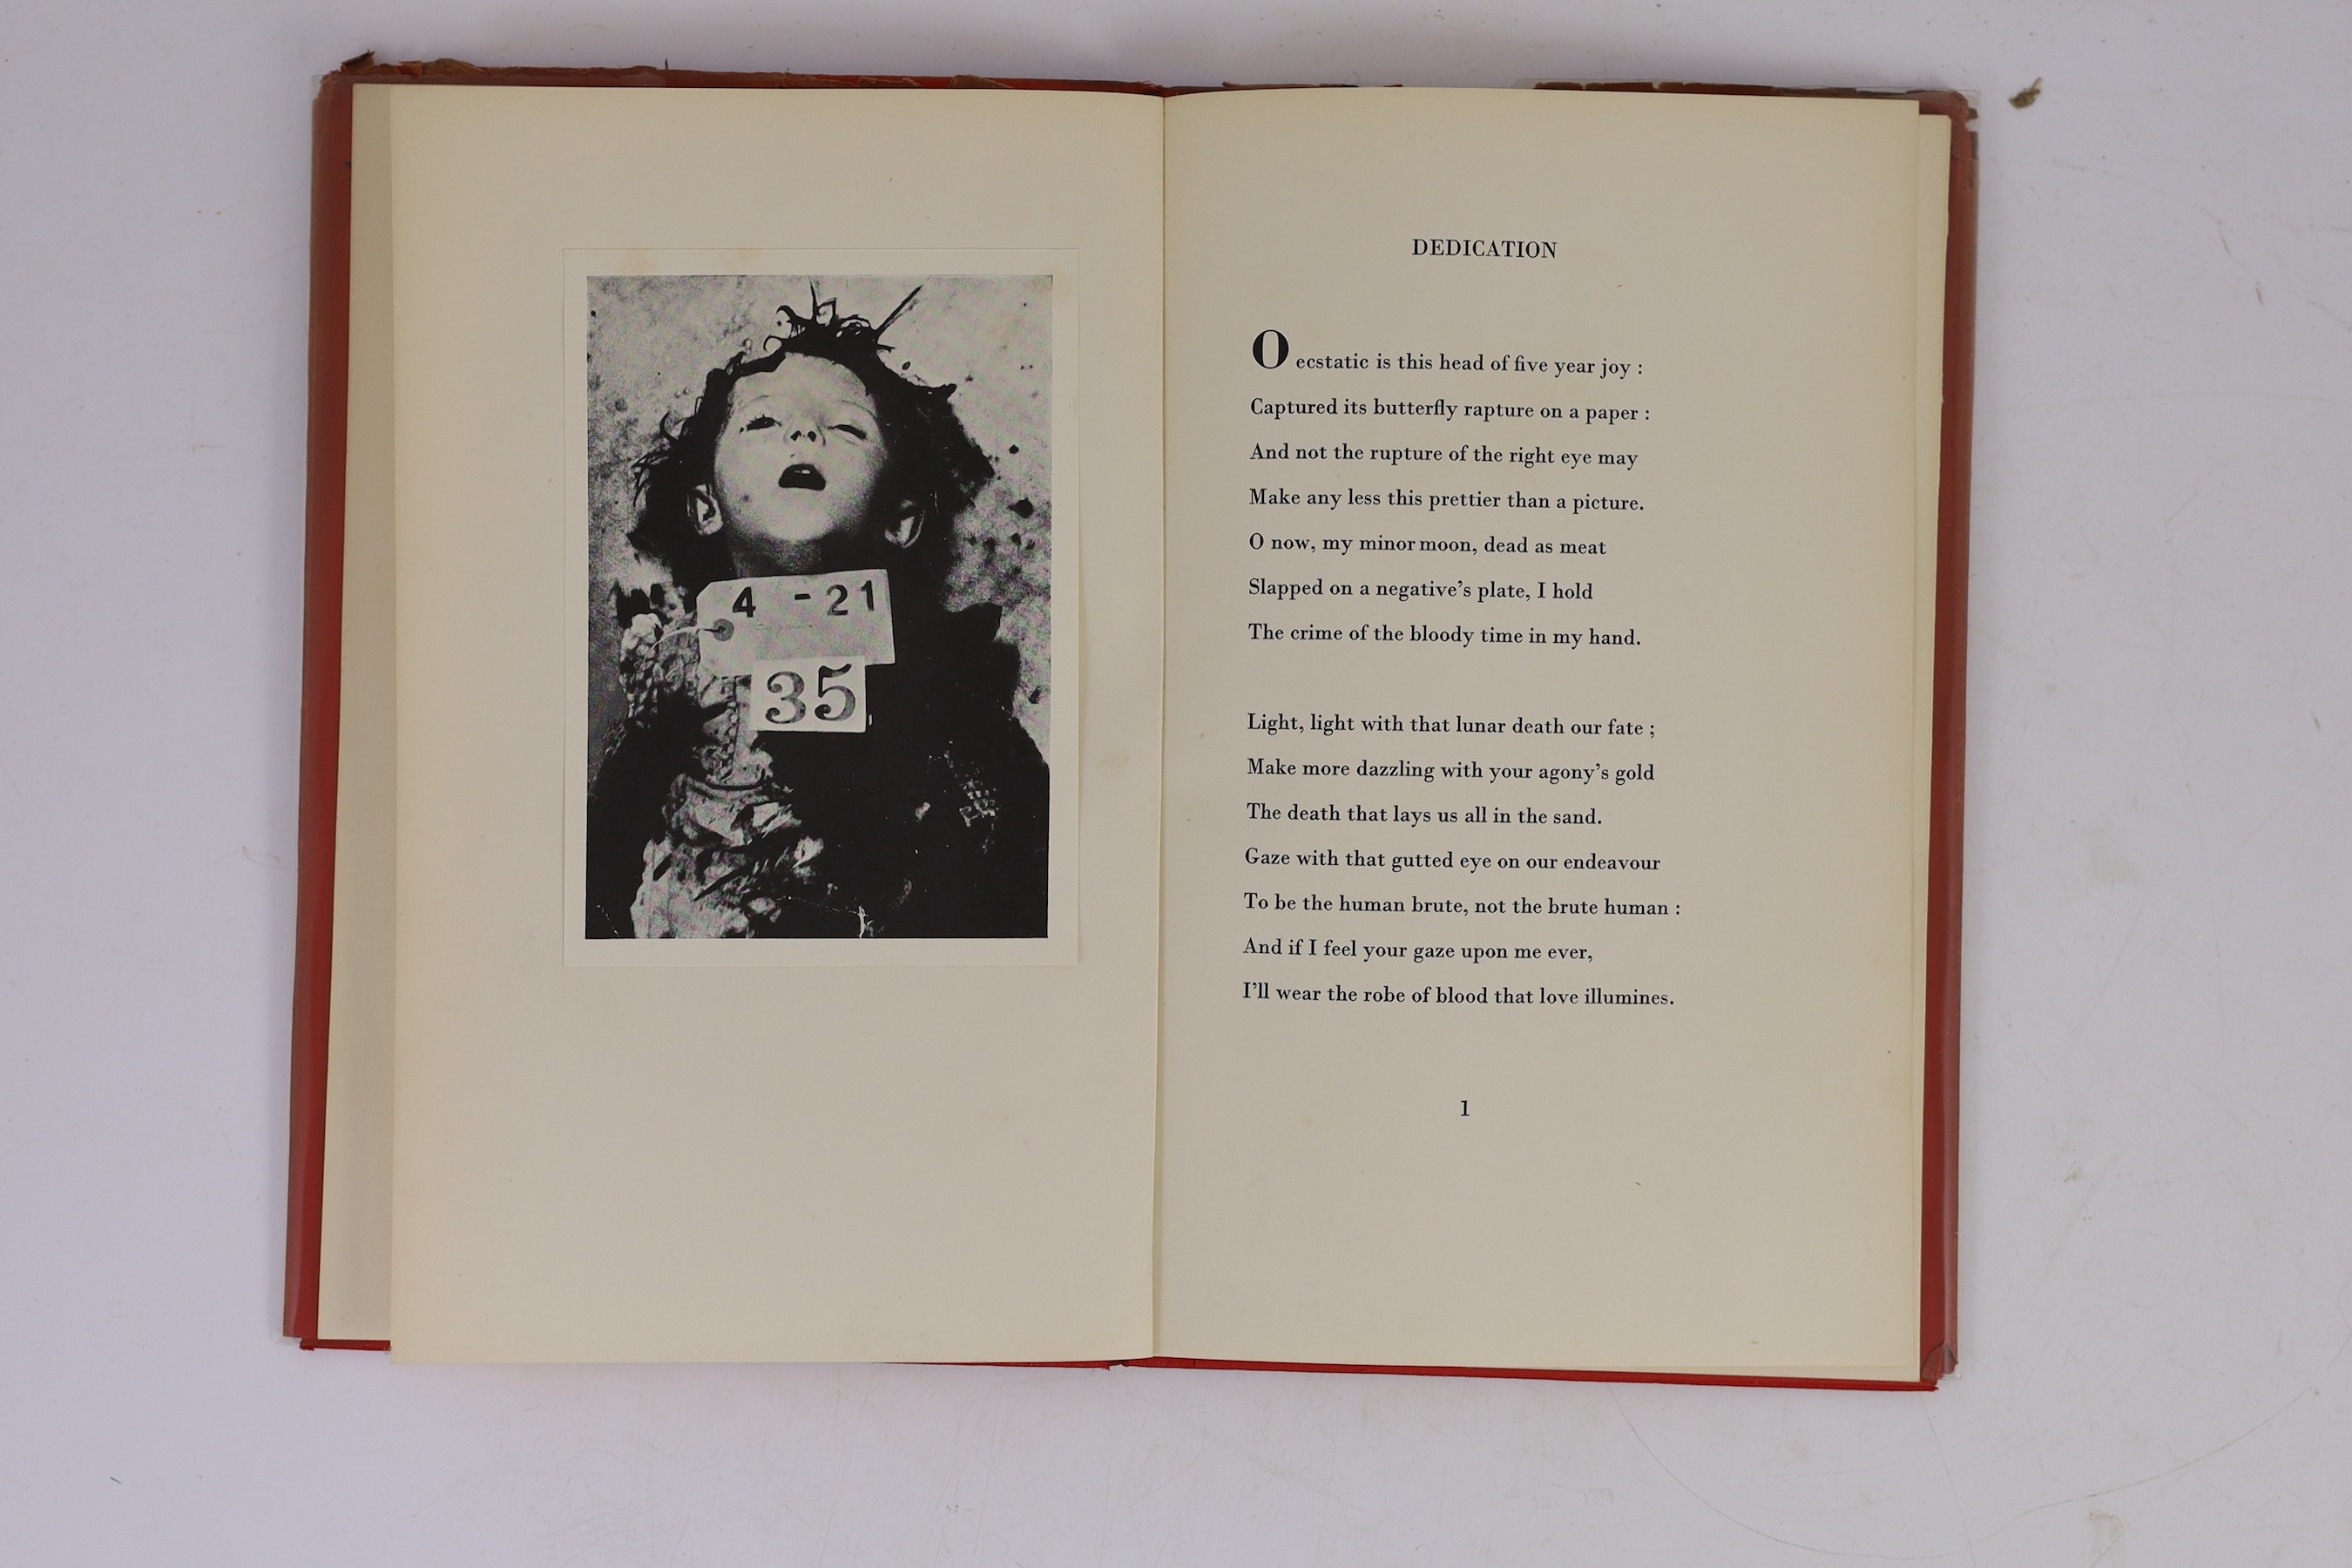 Sorley, Charles Hamilton - Marlborough and Other Poems, 8vo, cloth, Unversity Press, Cambridge, 1916; Eliot, T.S - Collected Poems 1909-1935, 8vo, cloth, Faber & Faber Limited, London, 1936; [Baker, George] - Elegy on Sp